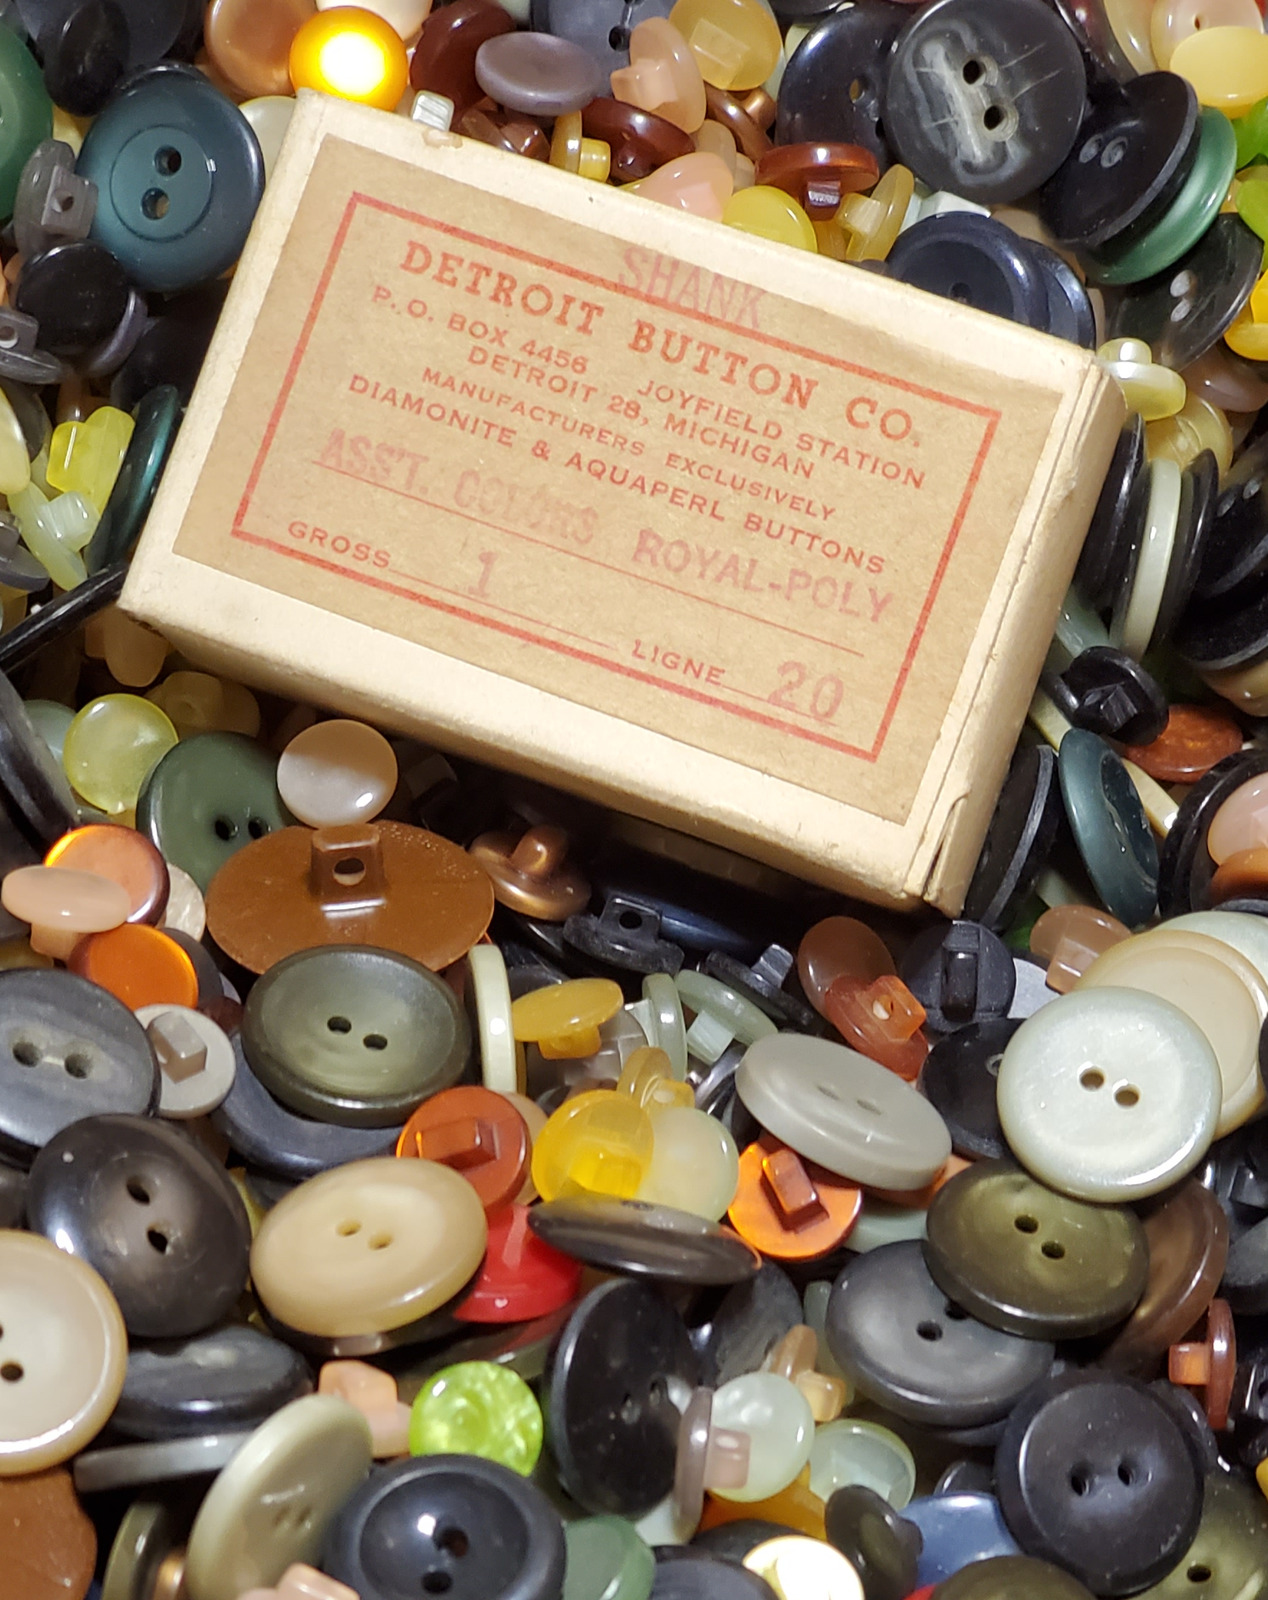 2 Pounds Lbs of Vintage 50s era Buttons Detroit Button Co Crafts Mixed Lots Colo